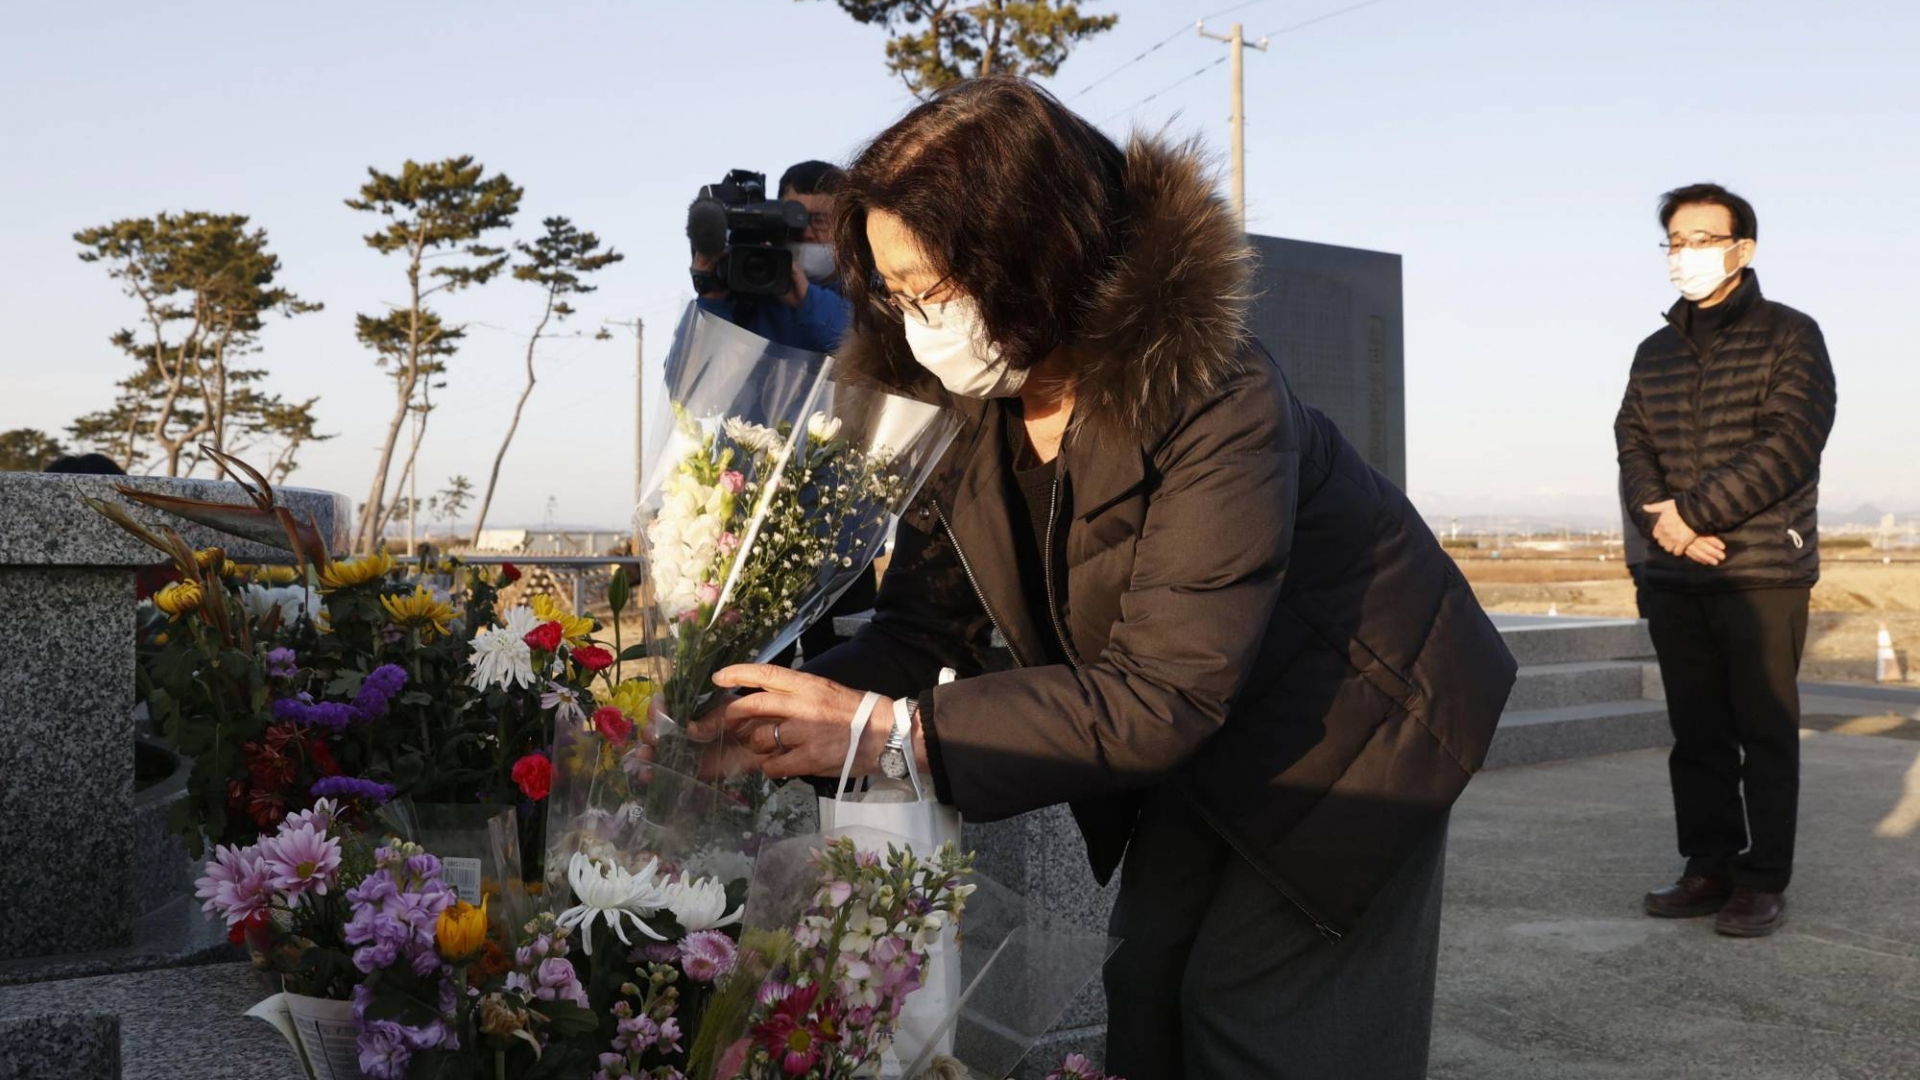 Japan mourns lives lost in earthquake and Fukushima disaster 10 years ago